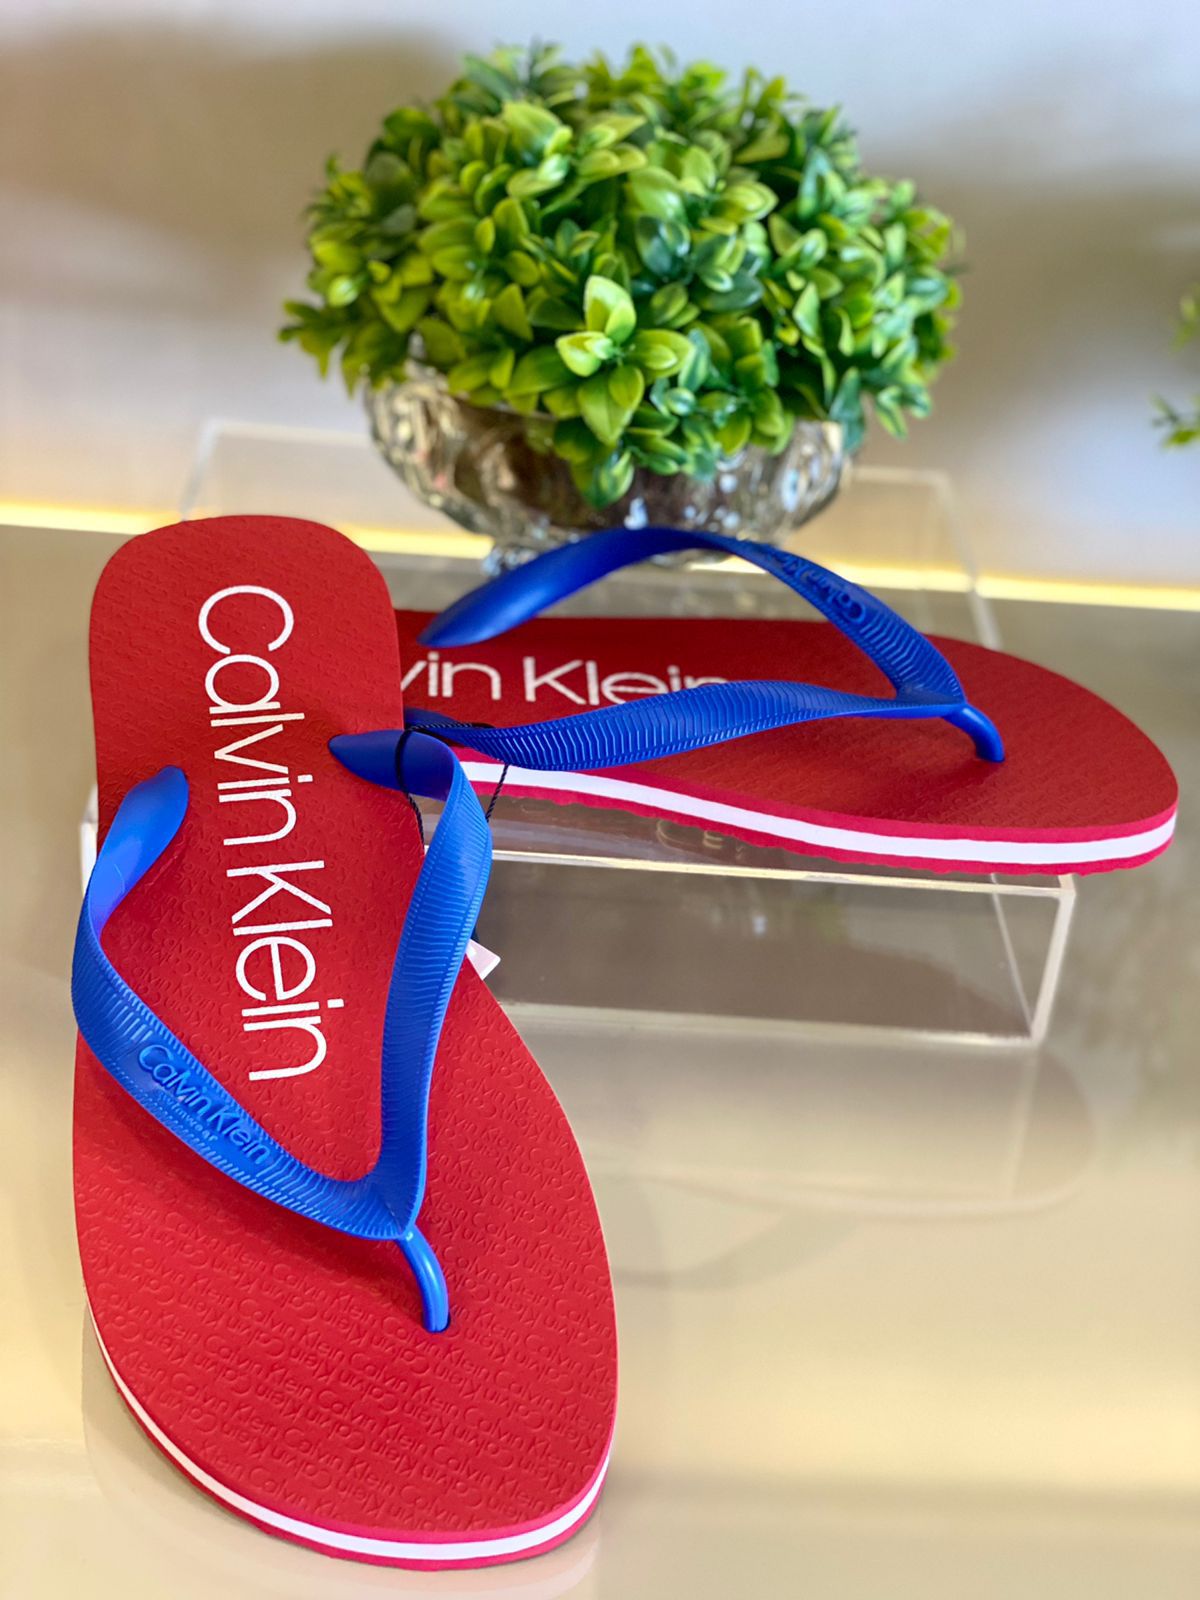 CALVIN KLEIN JEANS CHINELO RED BLUE - Conceito Rouparia